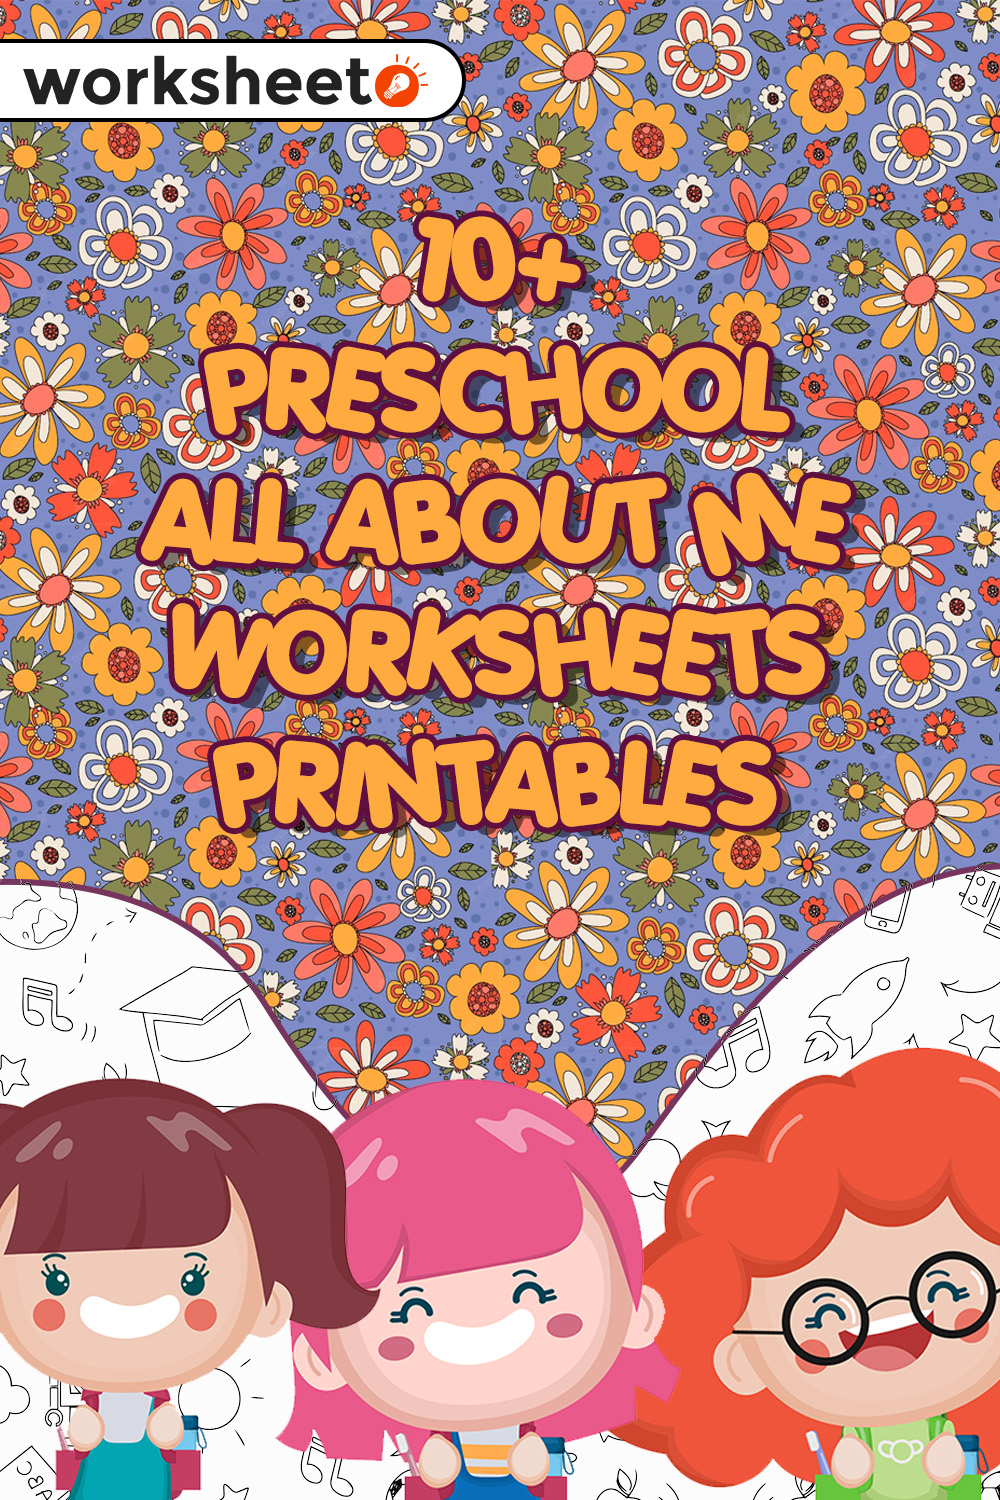 12 Images of Preschool All About Me Worksheets Printables